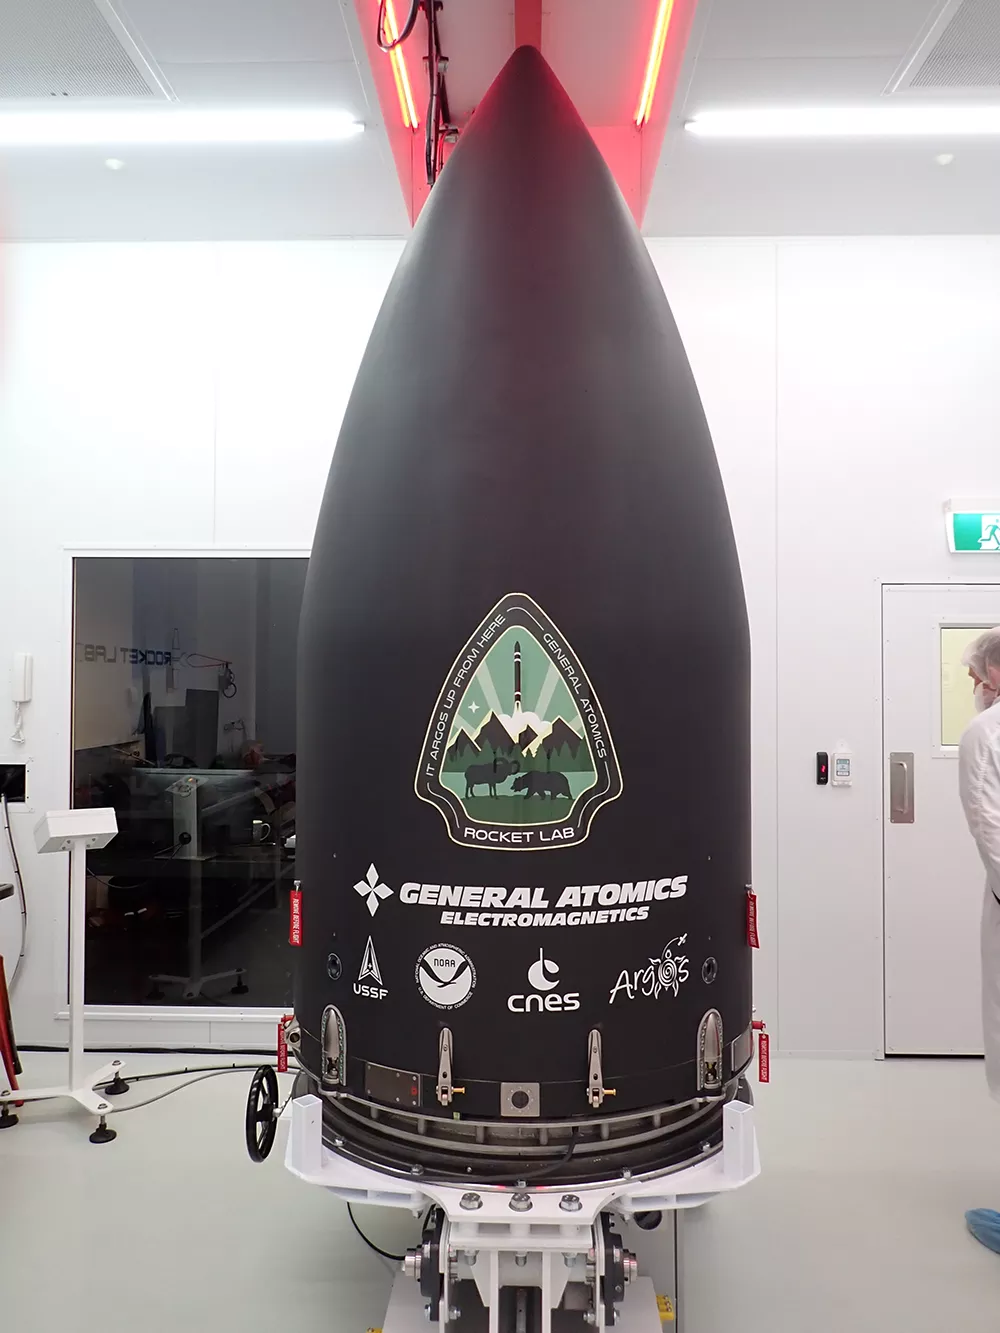 The closed Rocket Lab Electron Fairing containing the GAzelle satellite.